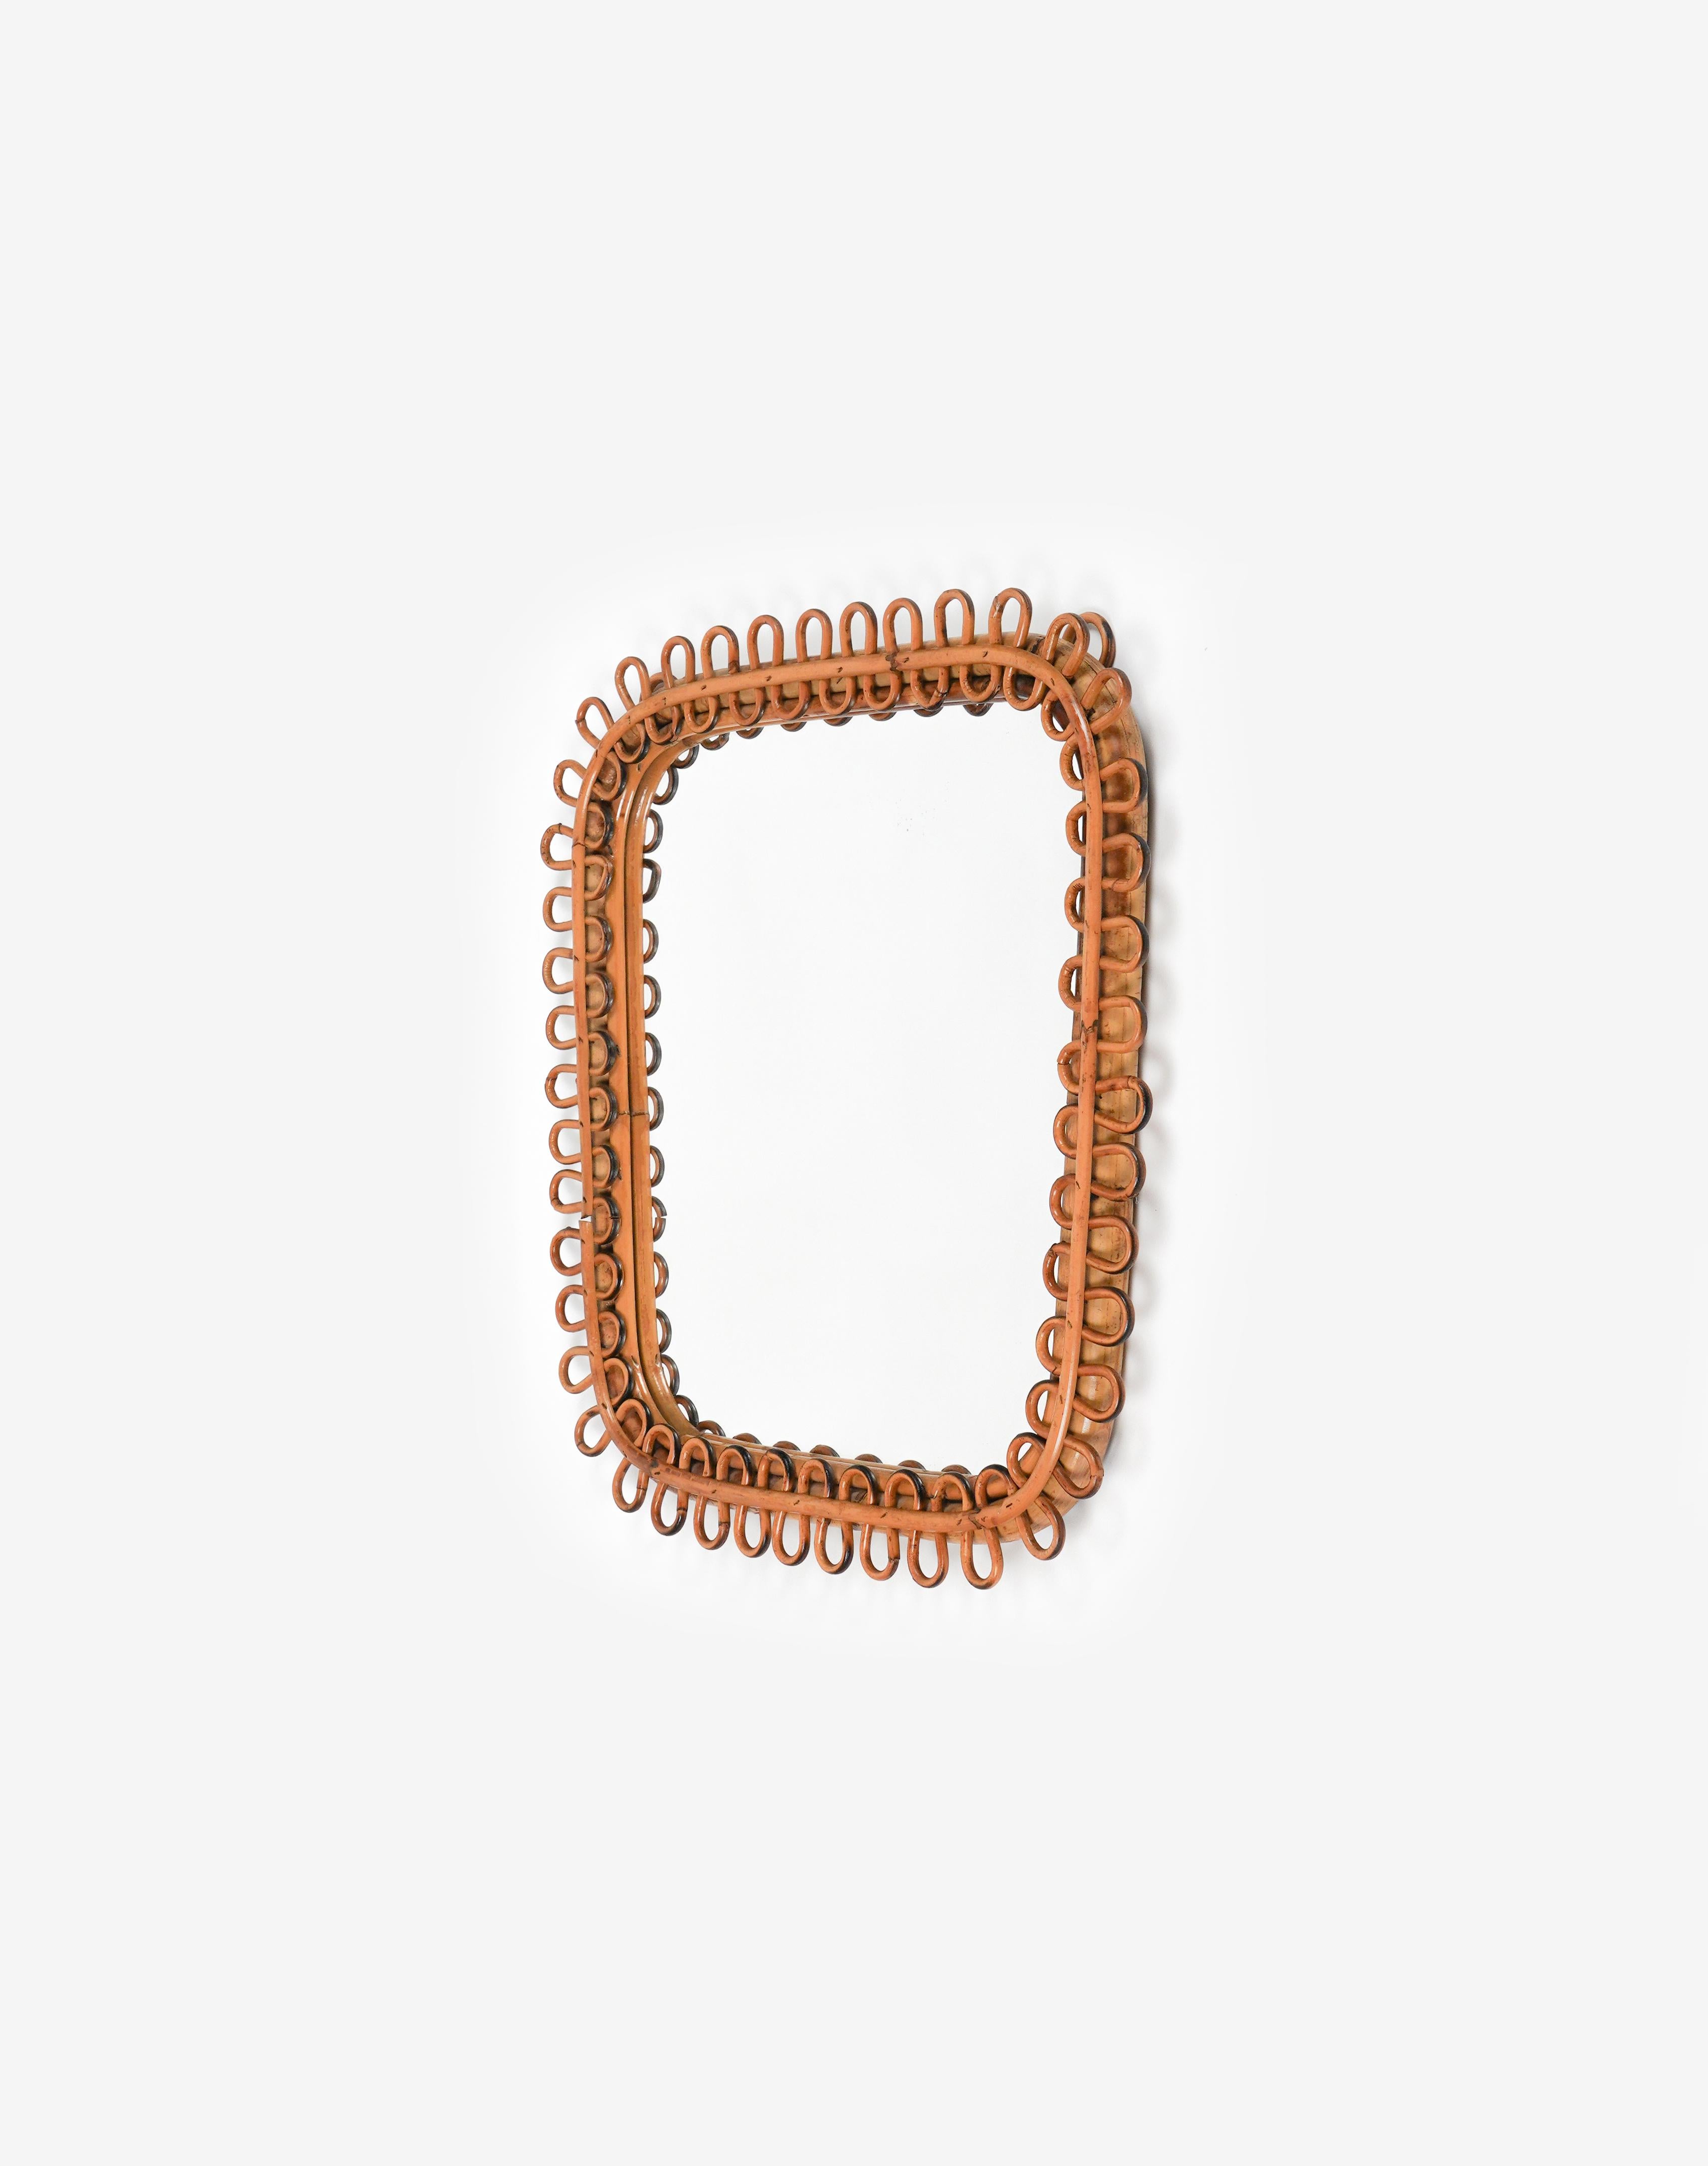 Midcentury Rattan & Bamboo Square Wall Mirror Franco Albini Style, Italy 1960s For Sale 2